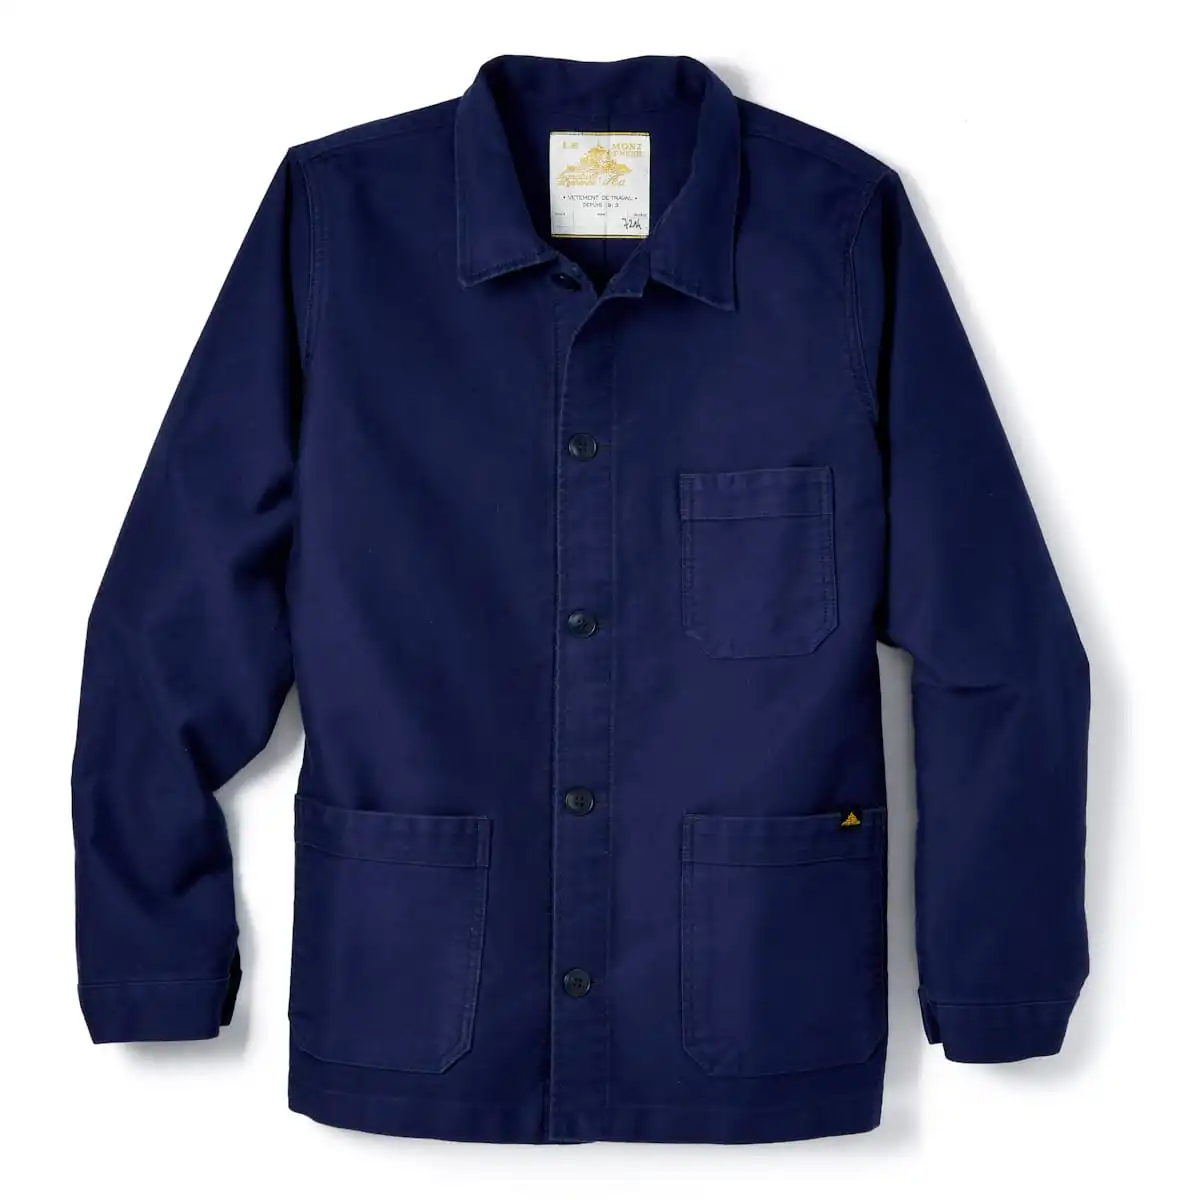 Le Mont St Michel French Work Jacket